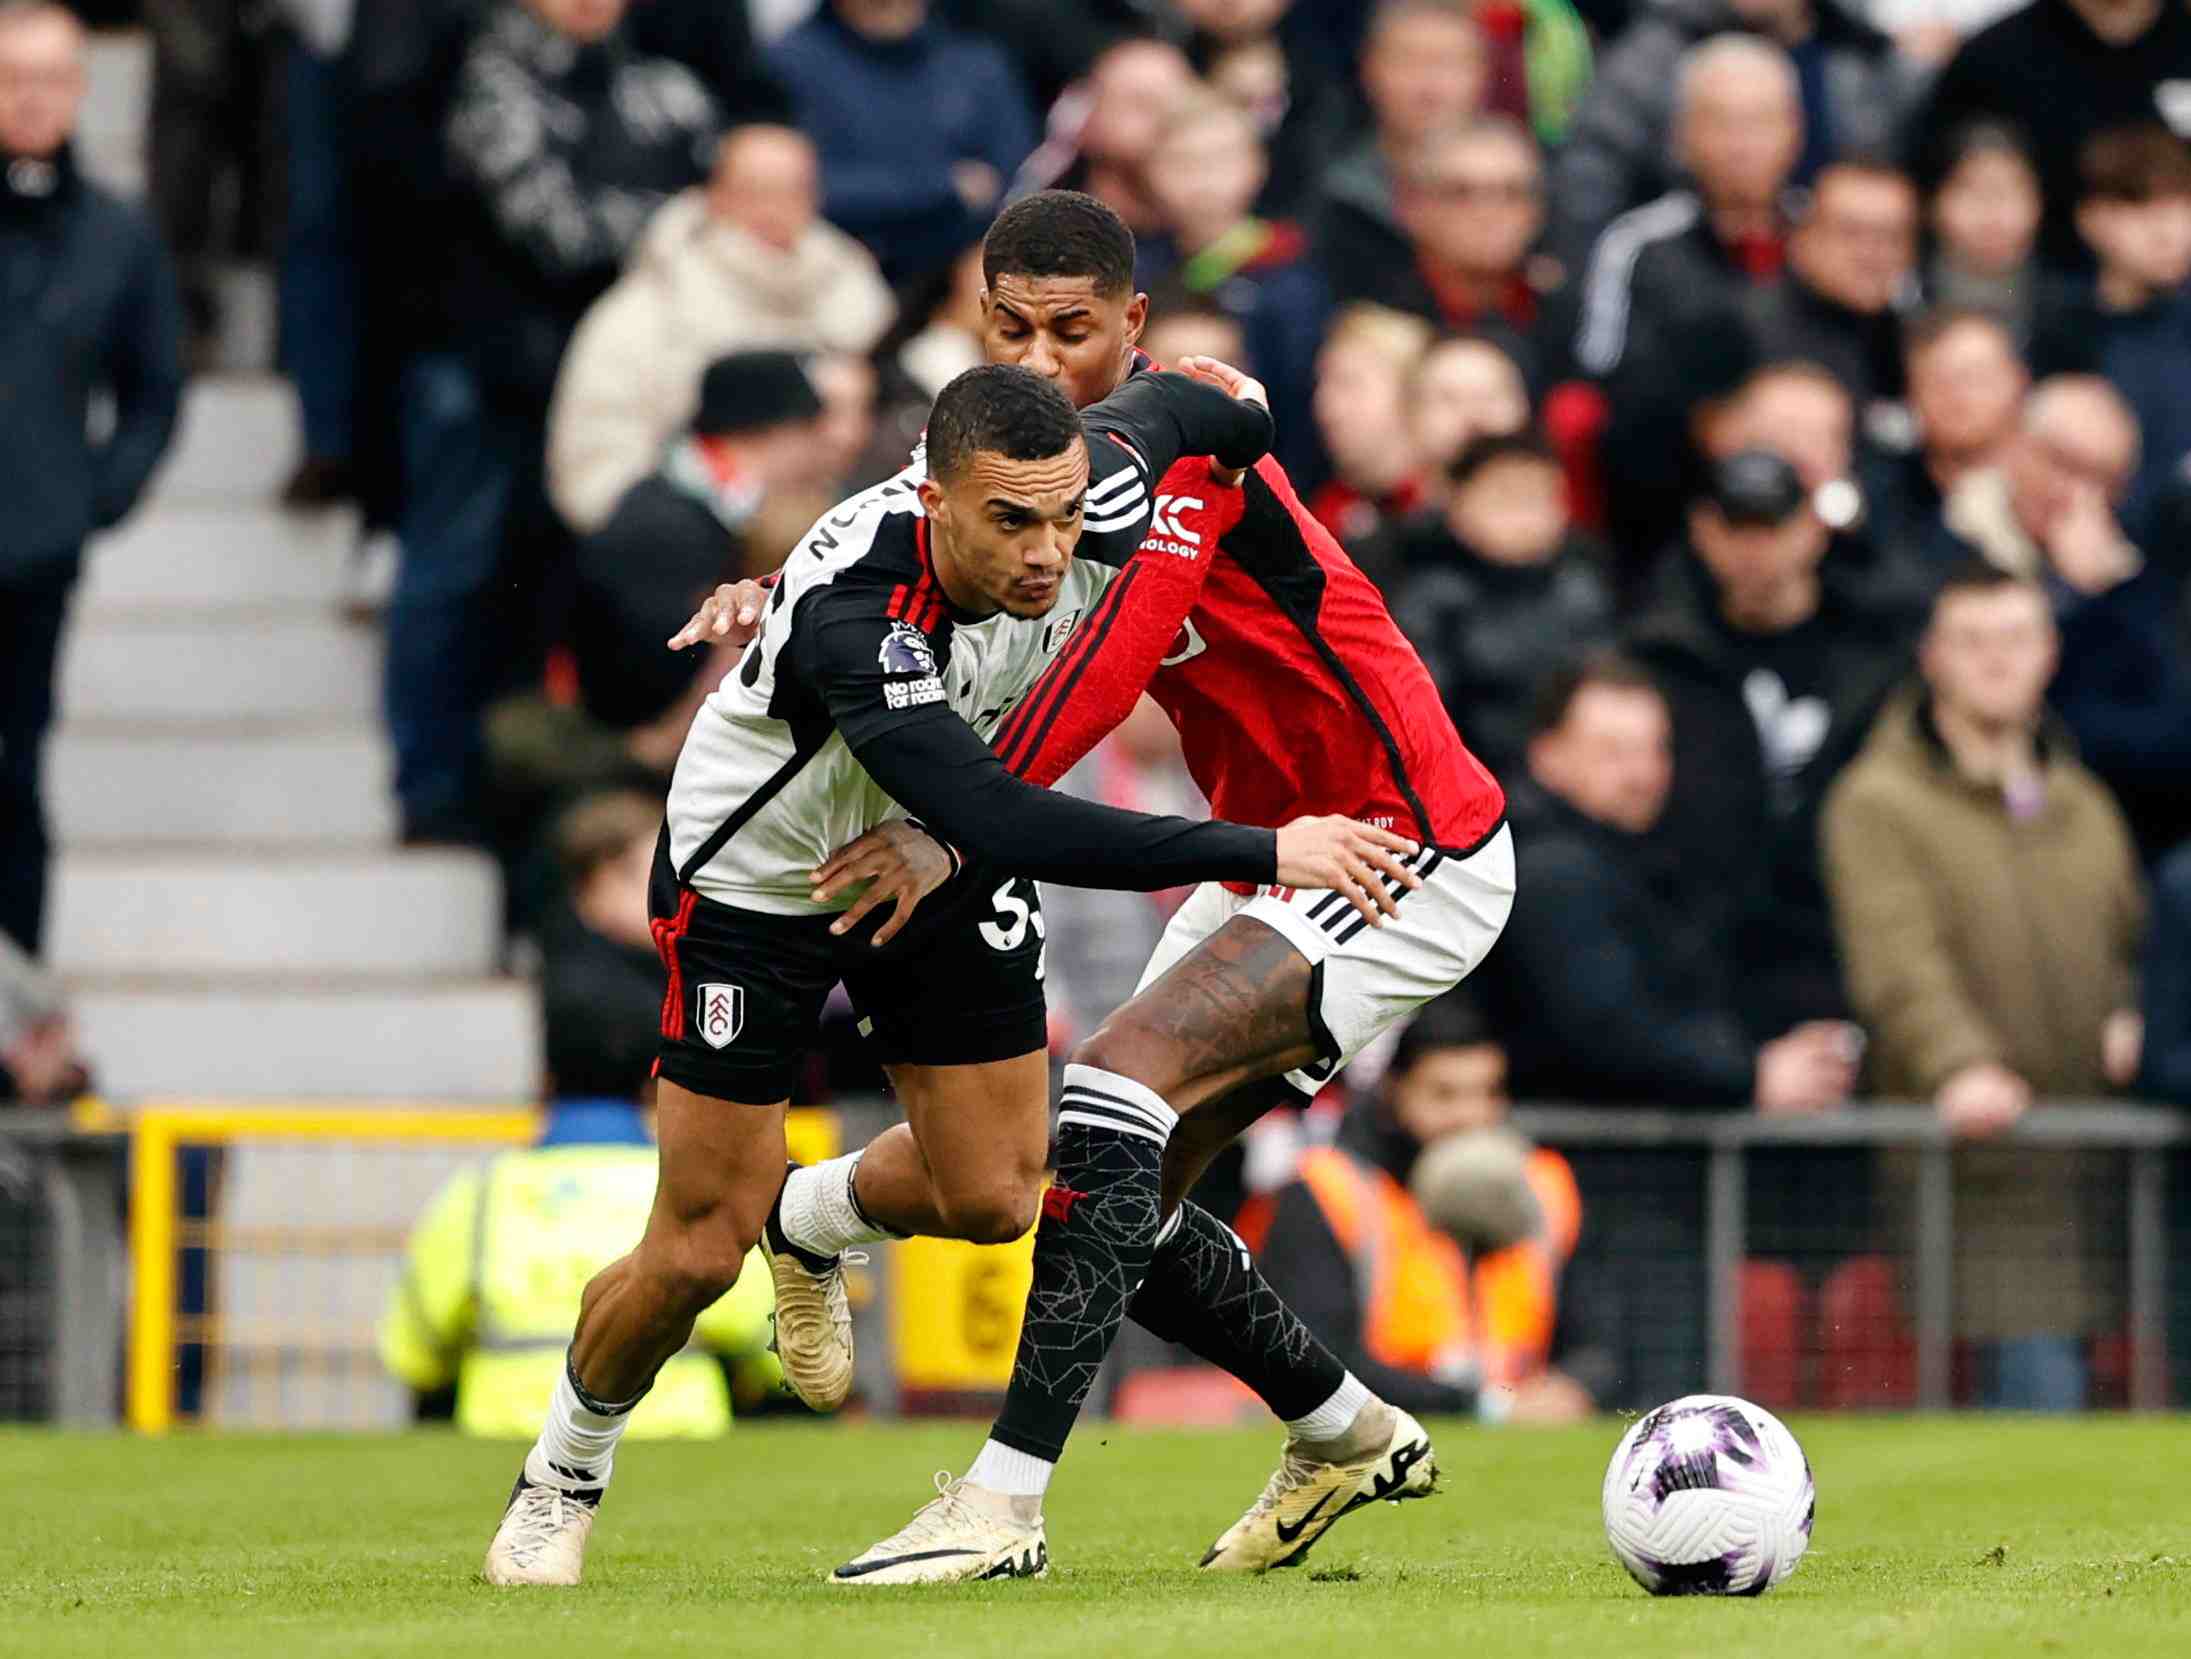 During a 2023/2024 Premier League match at Old Trafford on 24th February 2024, Fulham's Antonee Robinson skillfully maneuvers past Manchester United's Marcus Rashford.